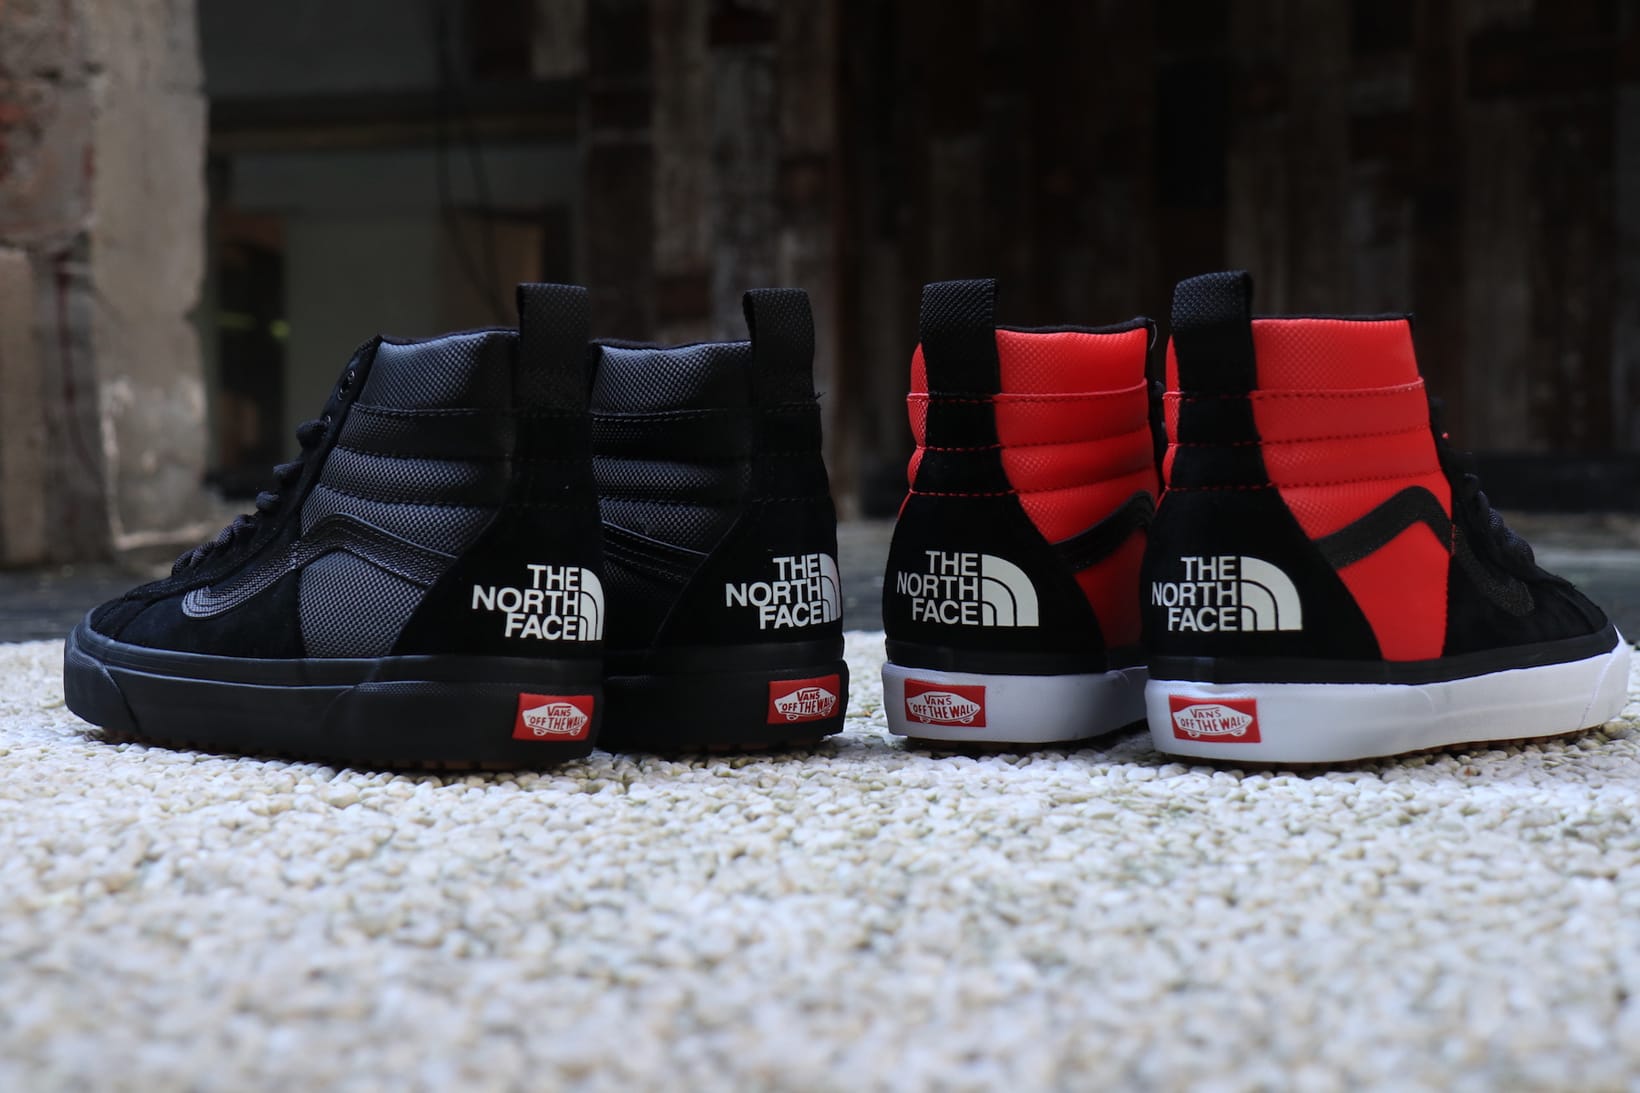 The North Face x Vans 2017 Fall Collection | HYPEBEAST الترمومتر